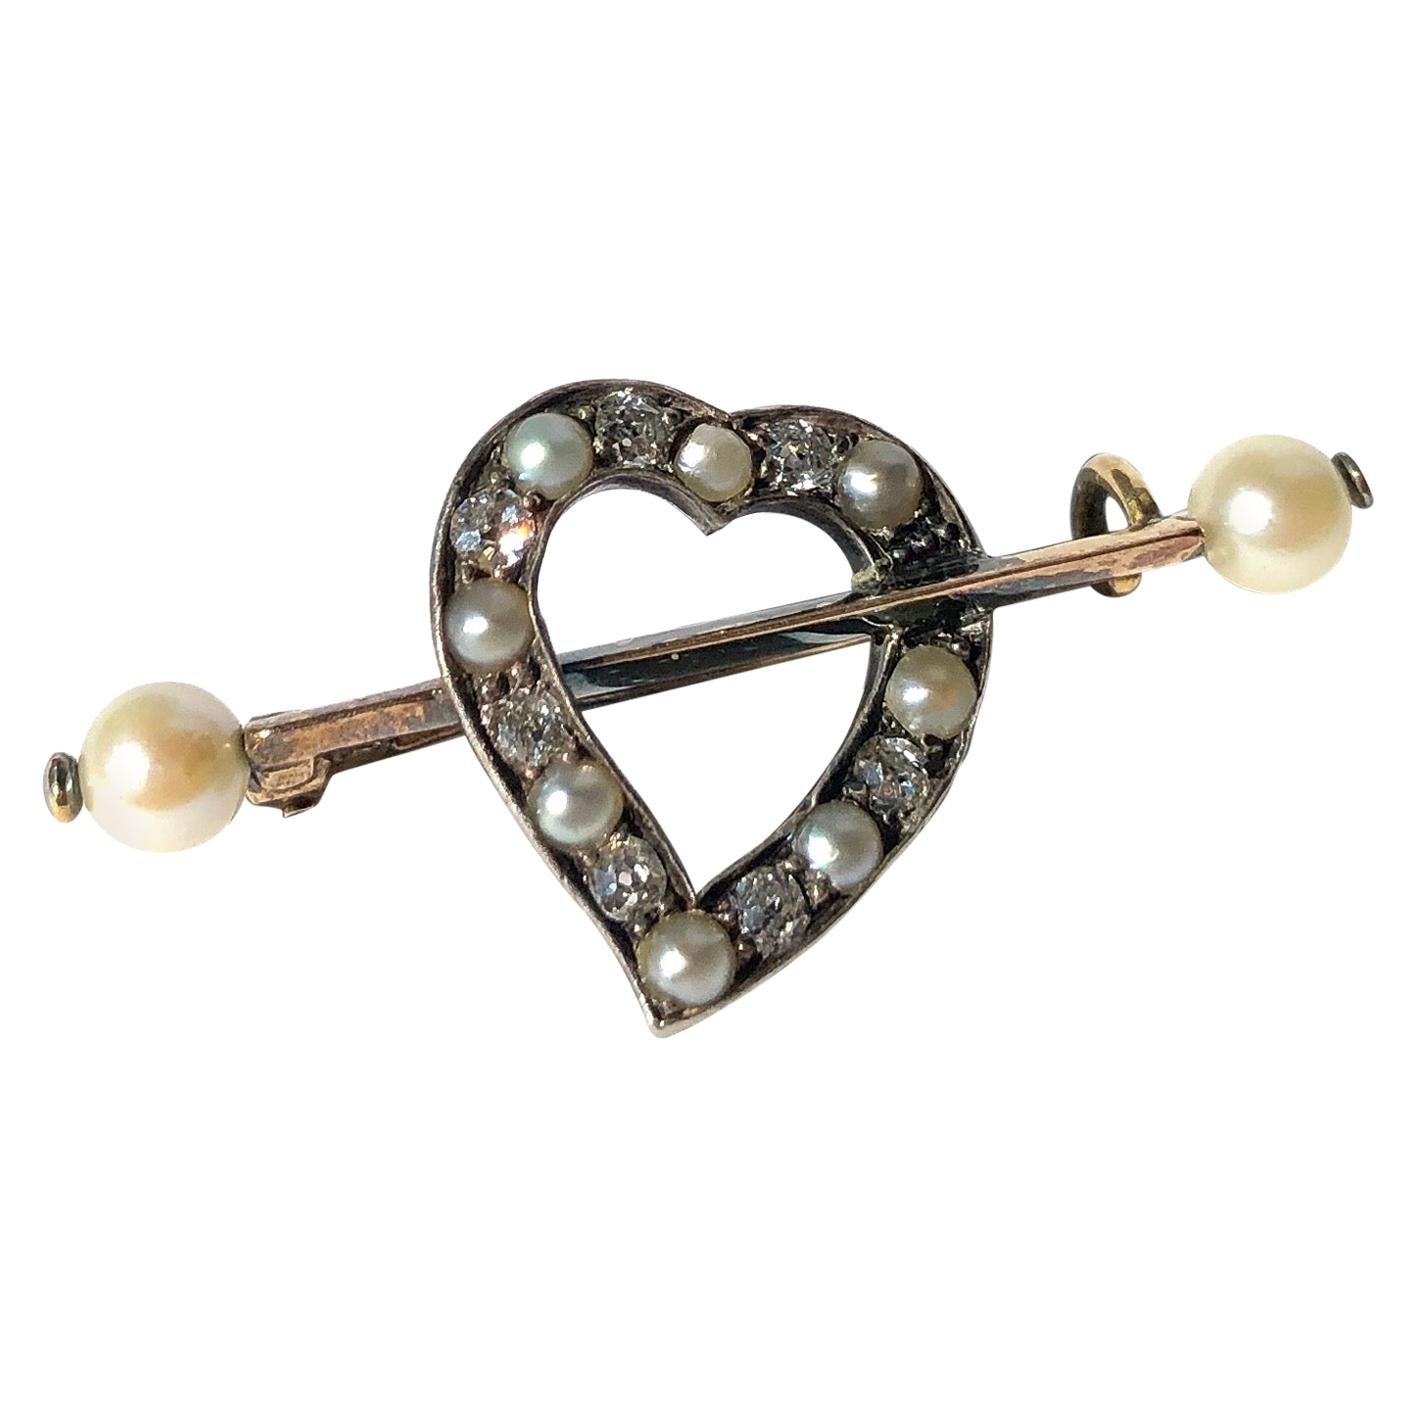 Edwardian Diamond and Pearl Witches Heart Brooch